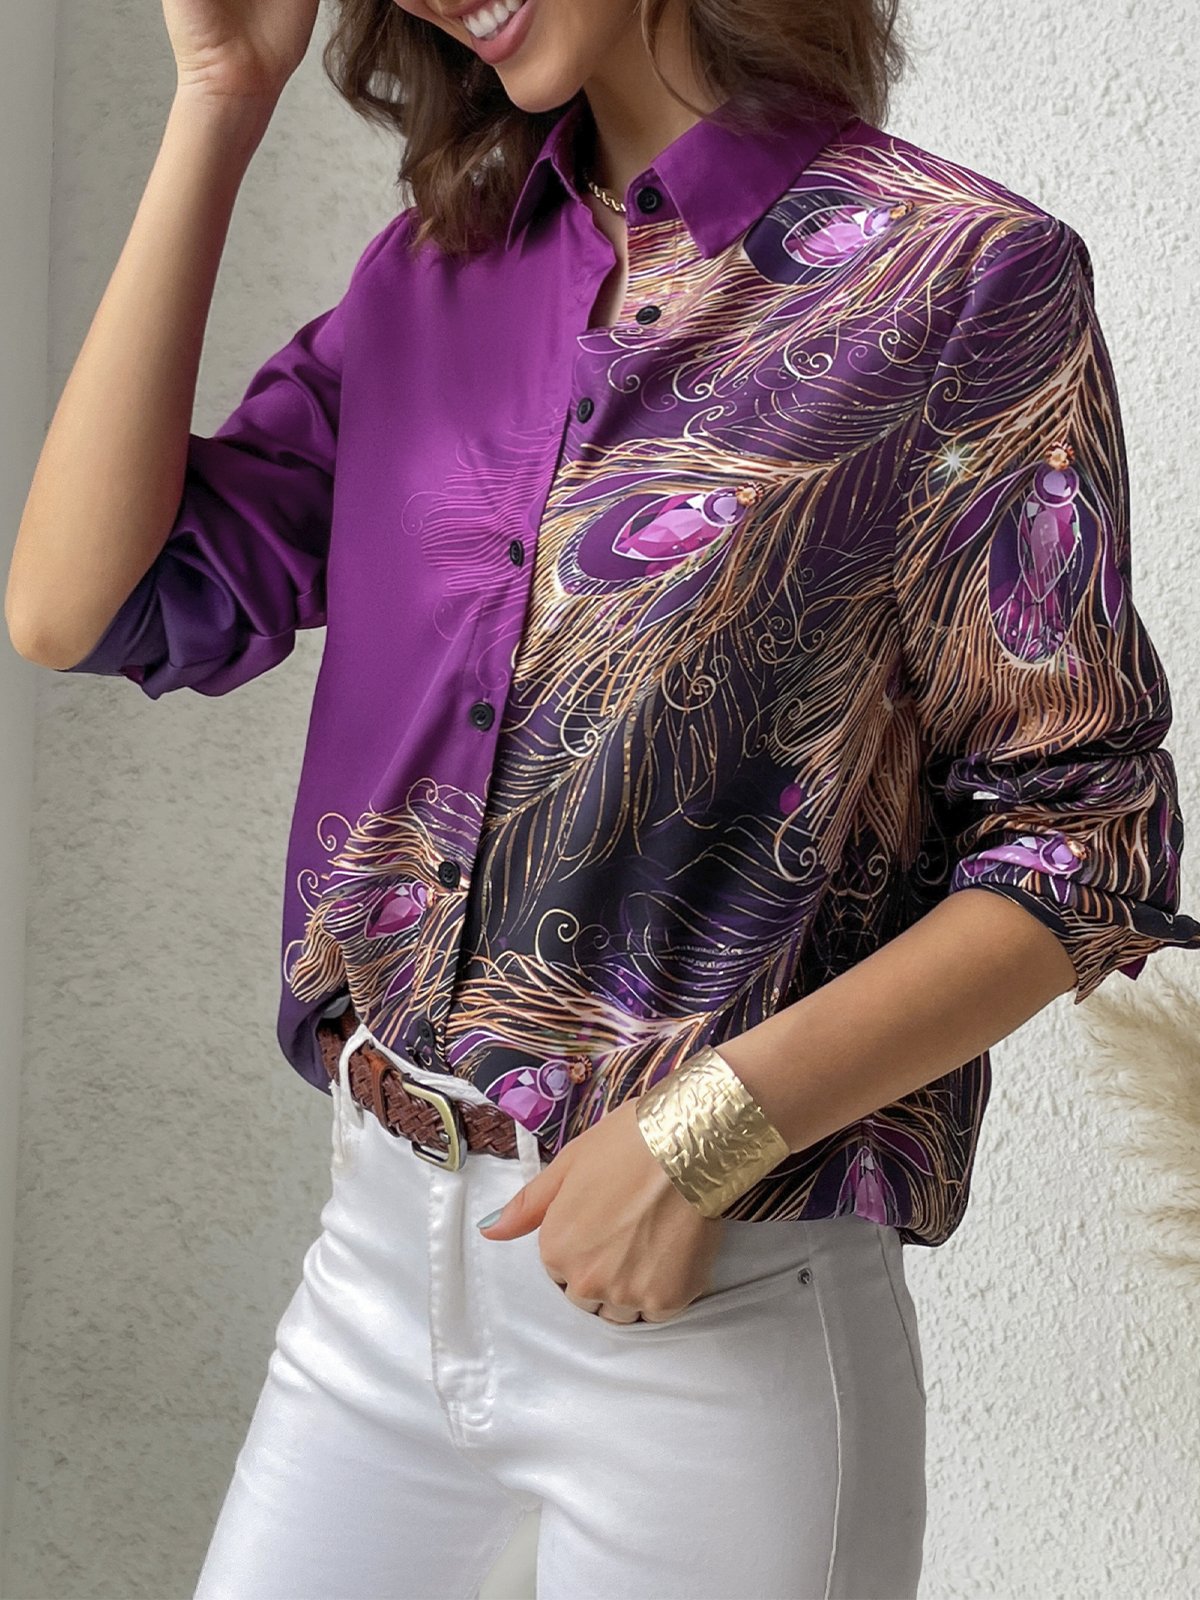 Casual Loose Shirt Collar Peacock Feather Pattern Long Sleeve Blouse